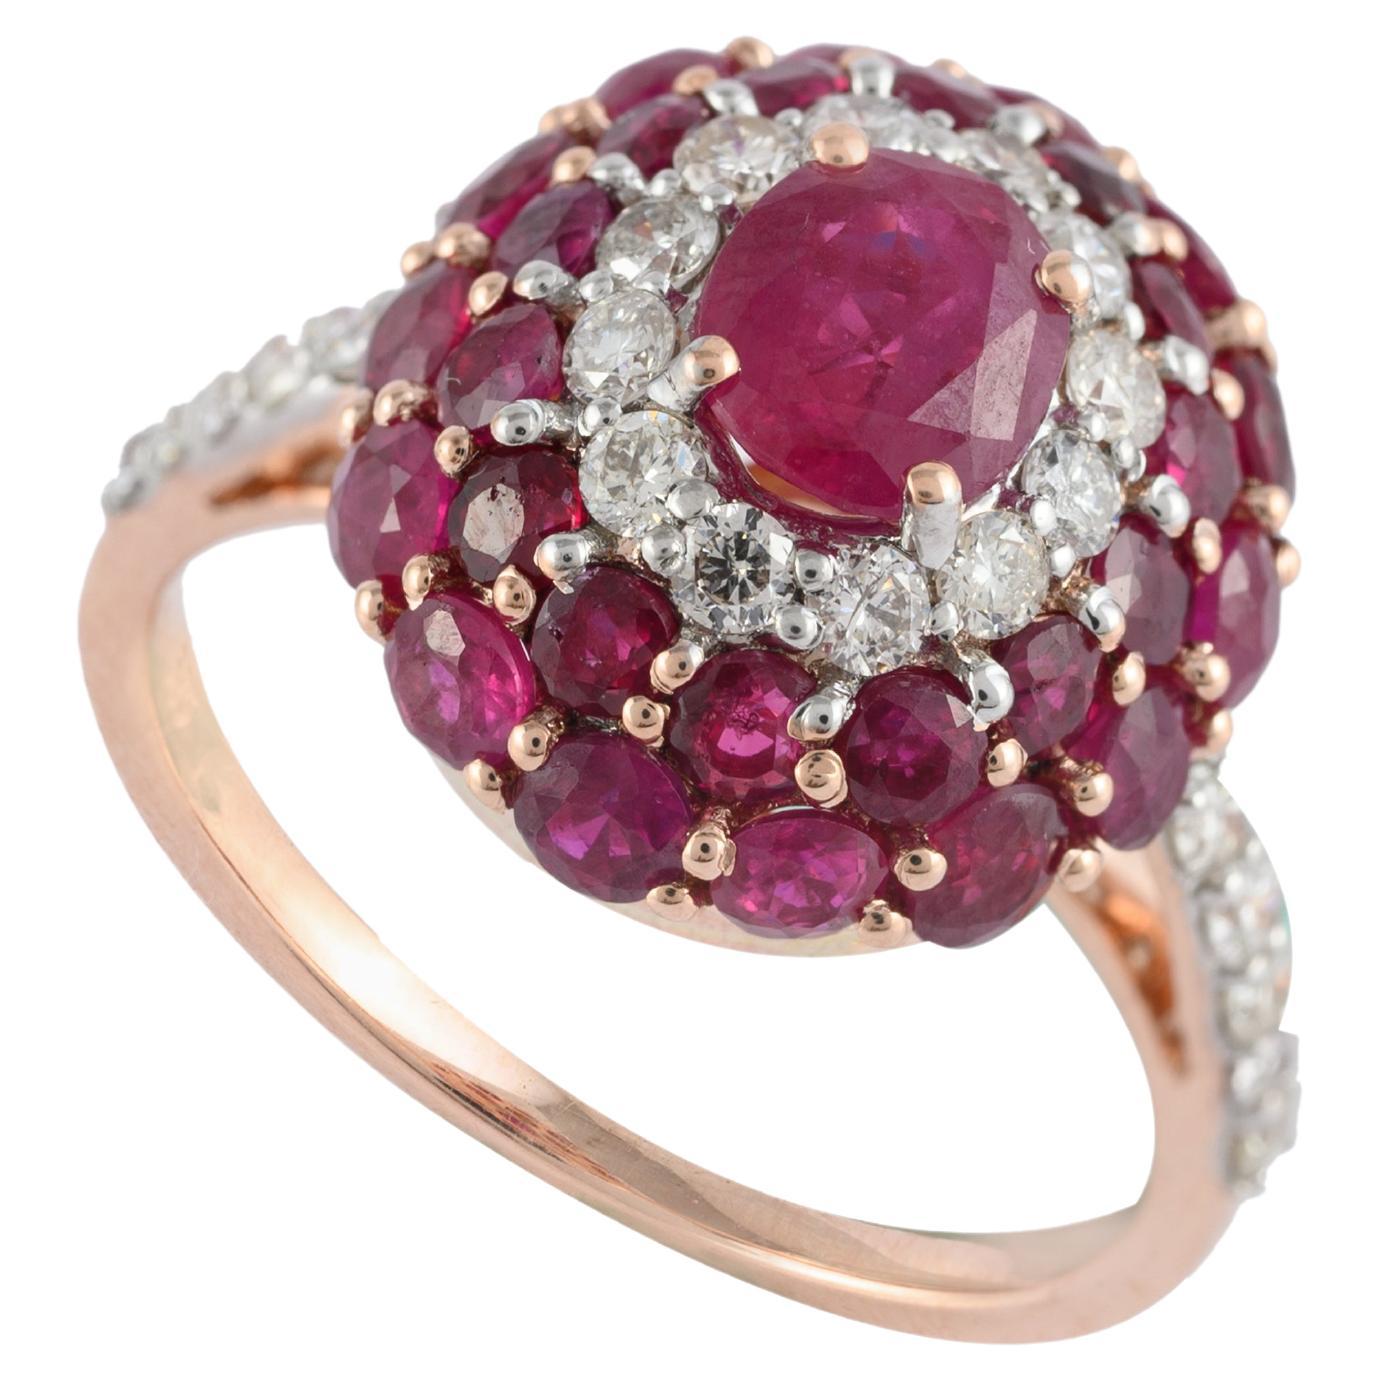 2.76 Carat Natural Ruby Cluster Ring in 14k Solid Rose Gold with Diamonds